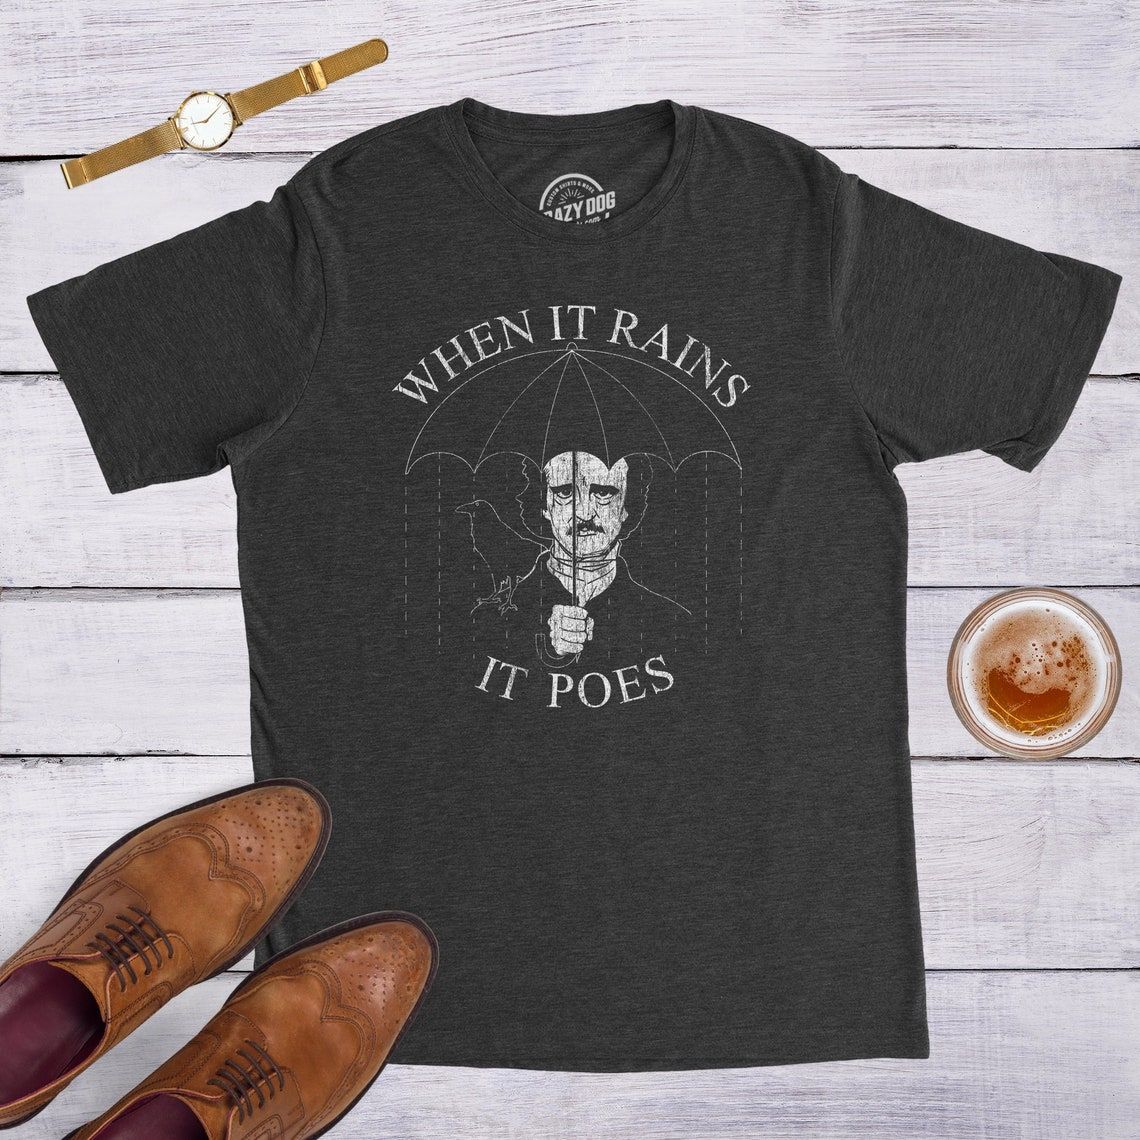 photo of Edgar Allan Poe shirt where he is holding an umbrella that says "when it rains, it Poes"